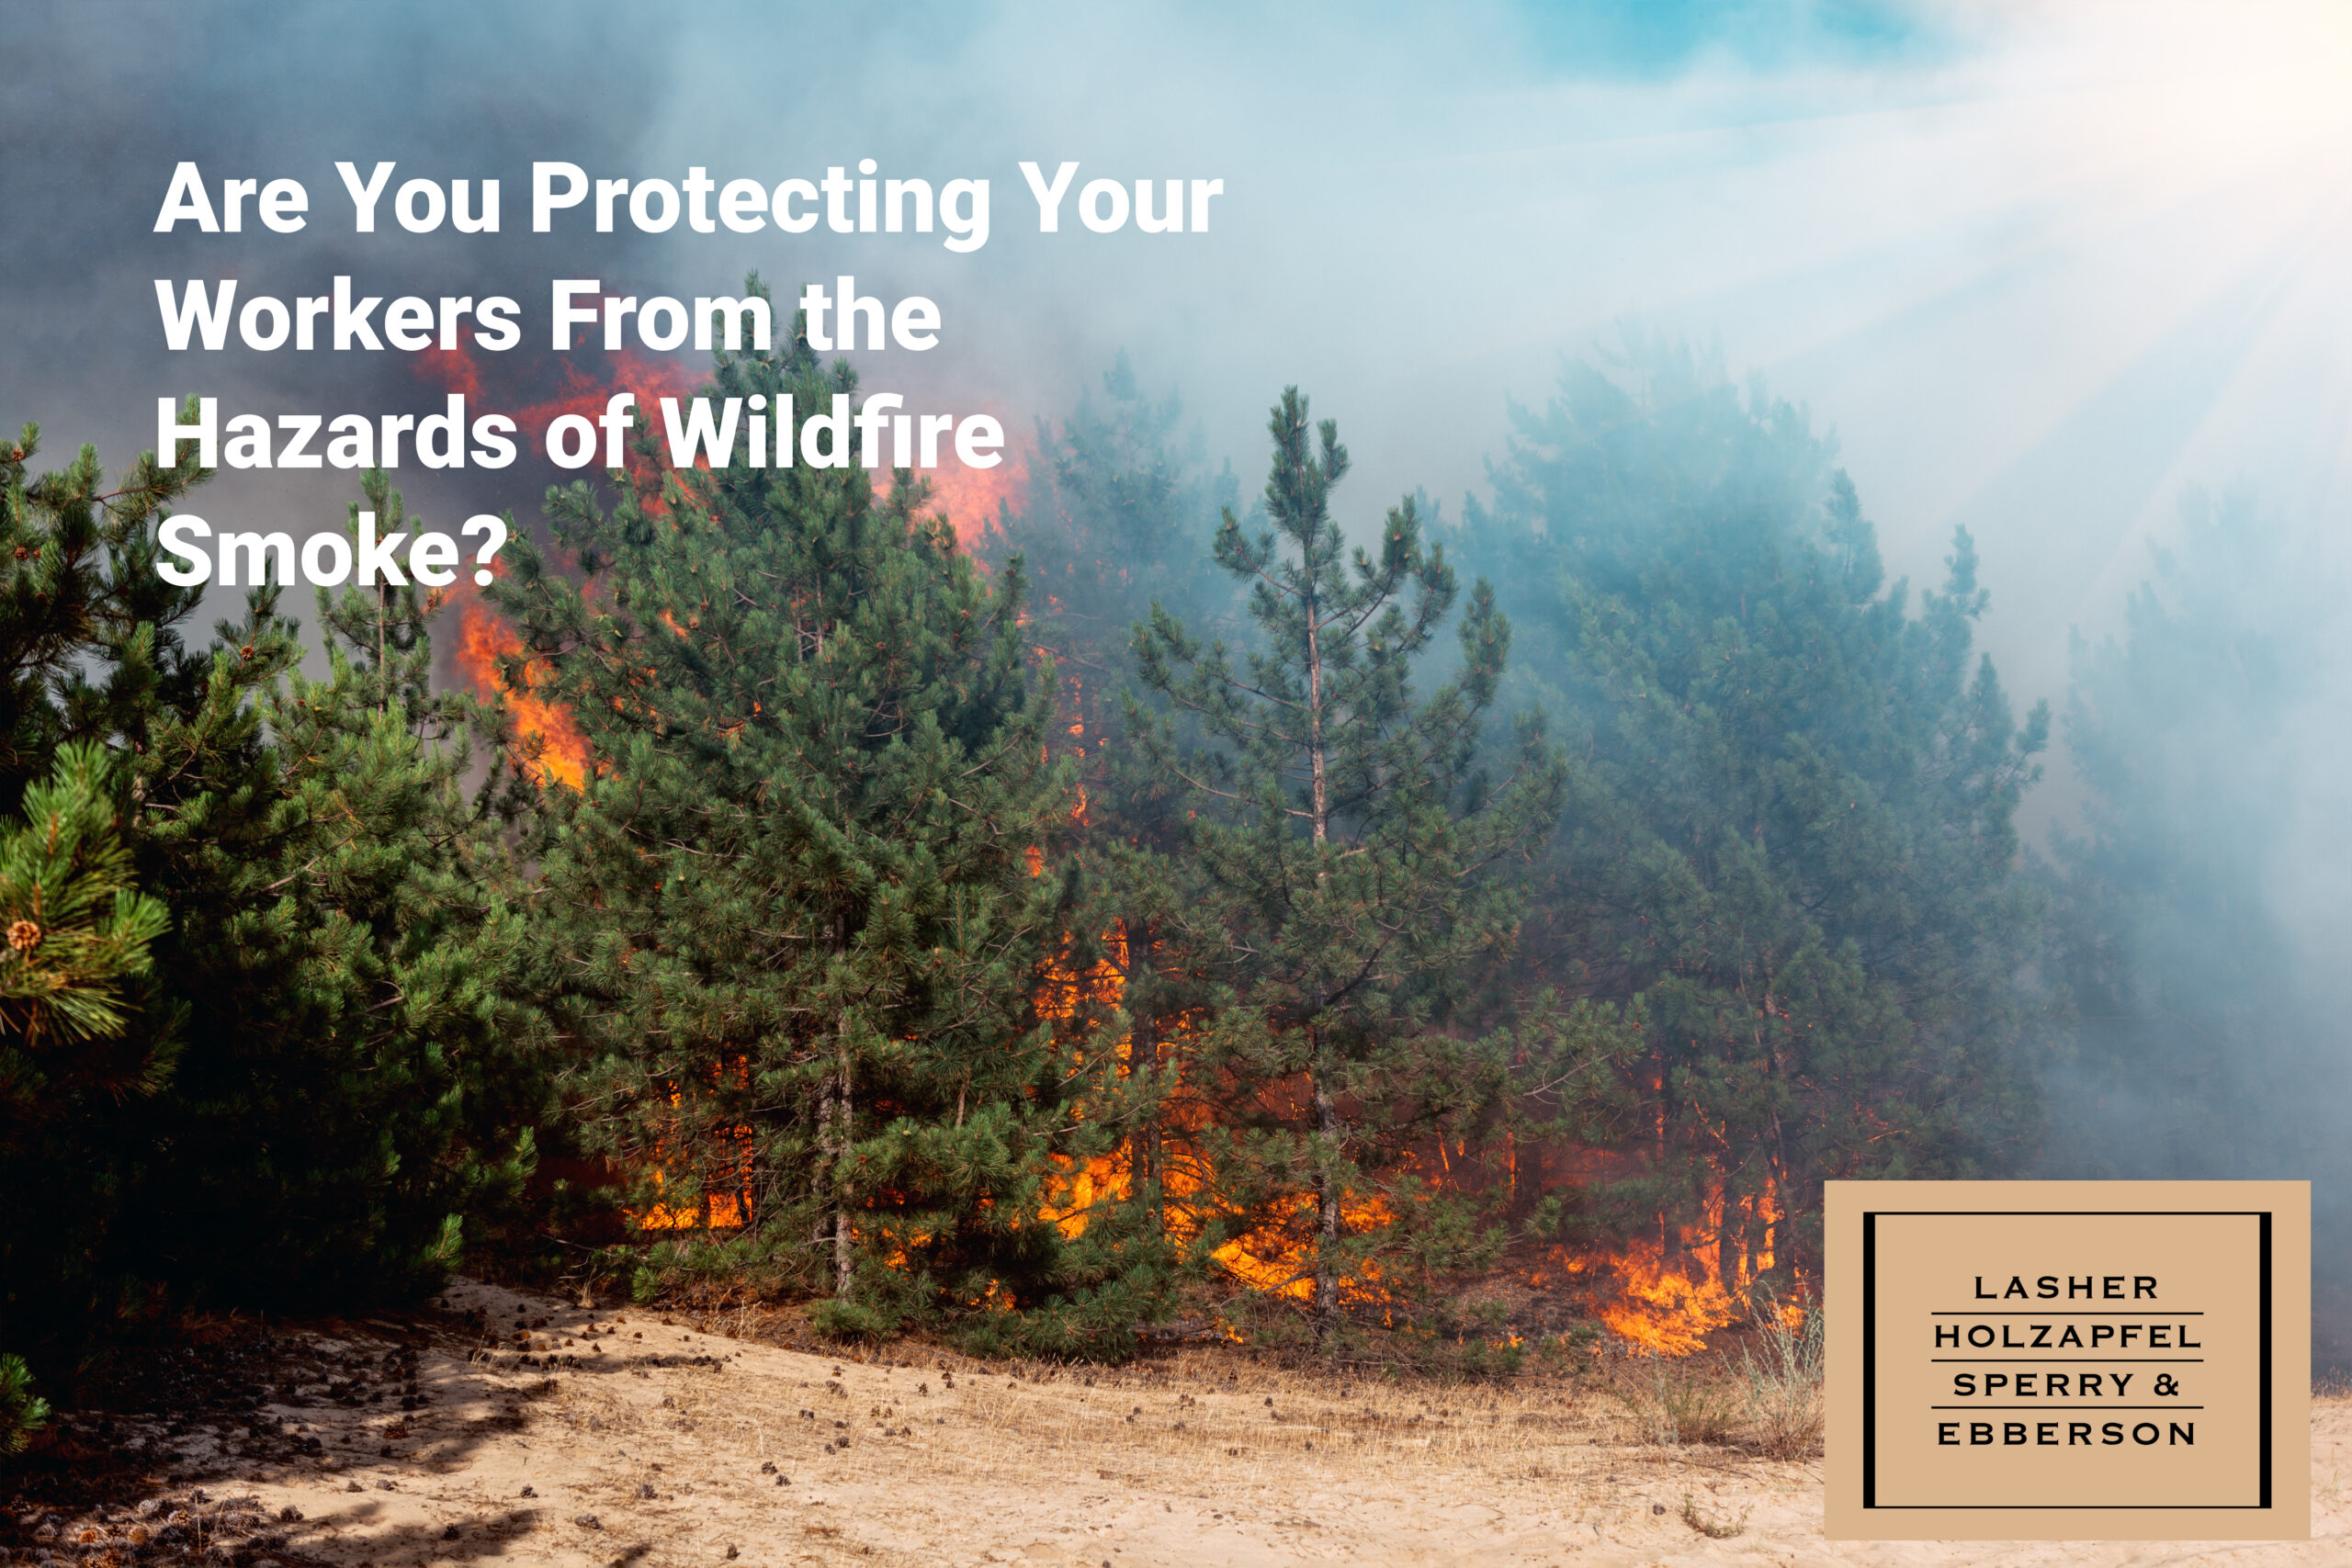 Are You Protecting Your Workers From the Hazards of Wildfire Smoke?